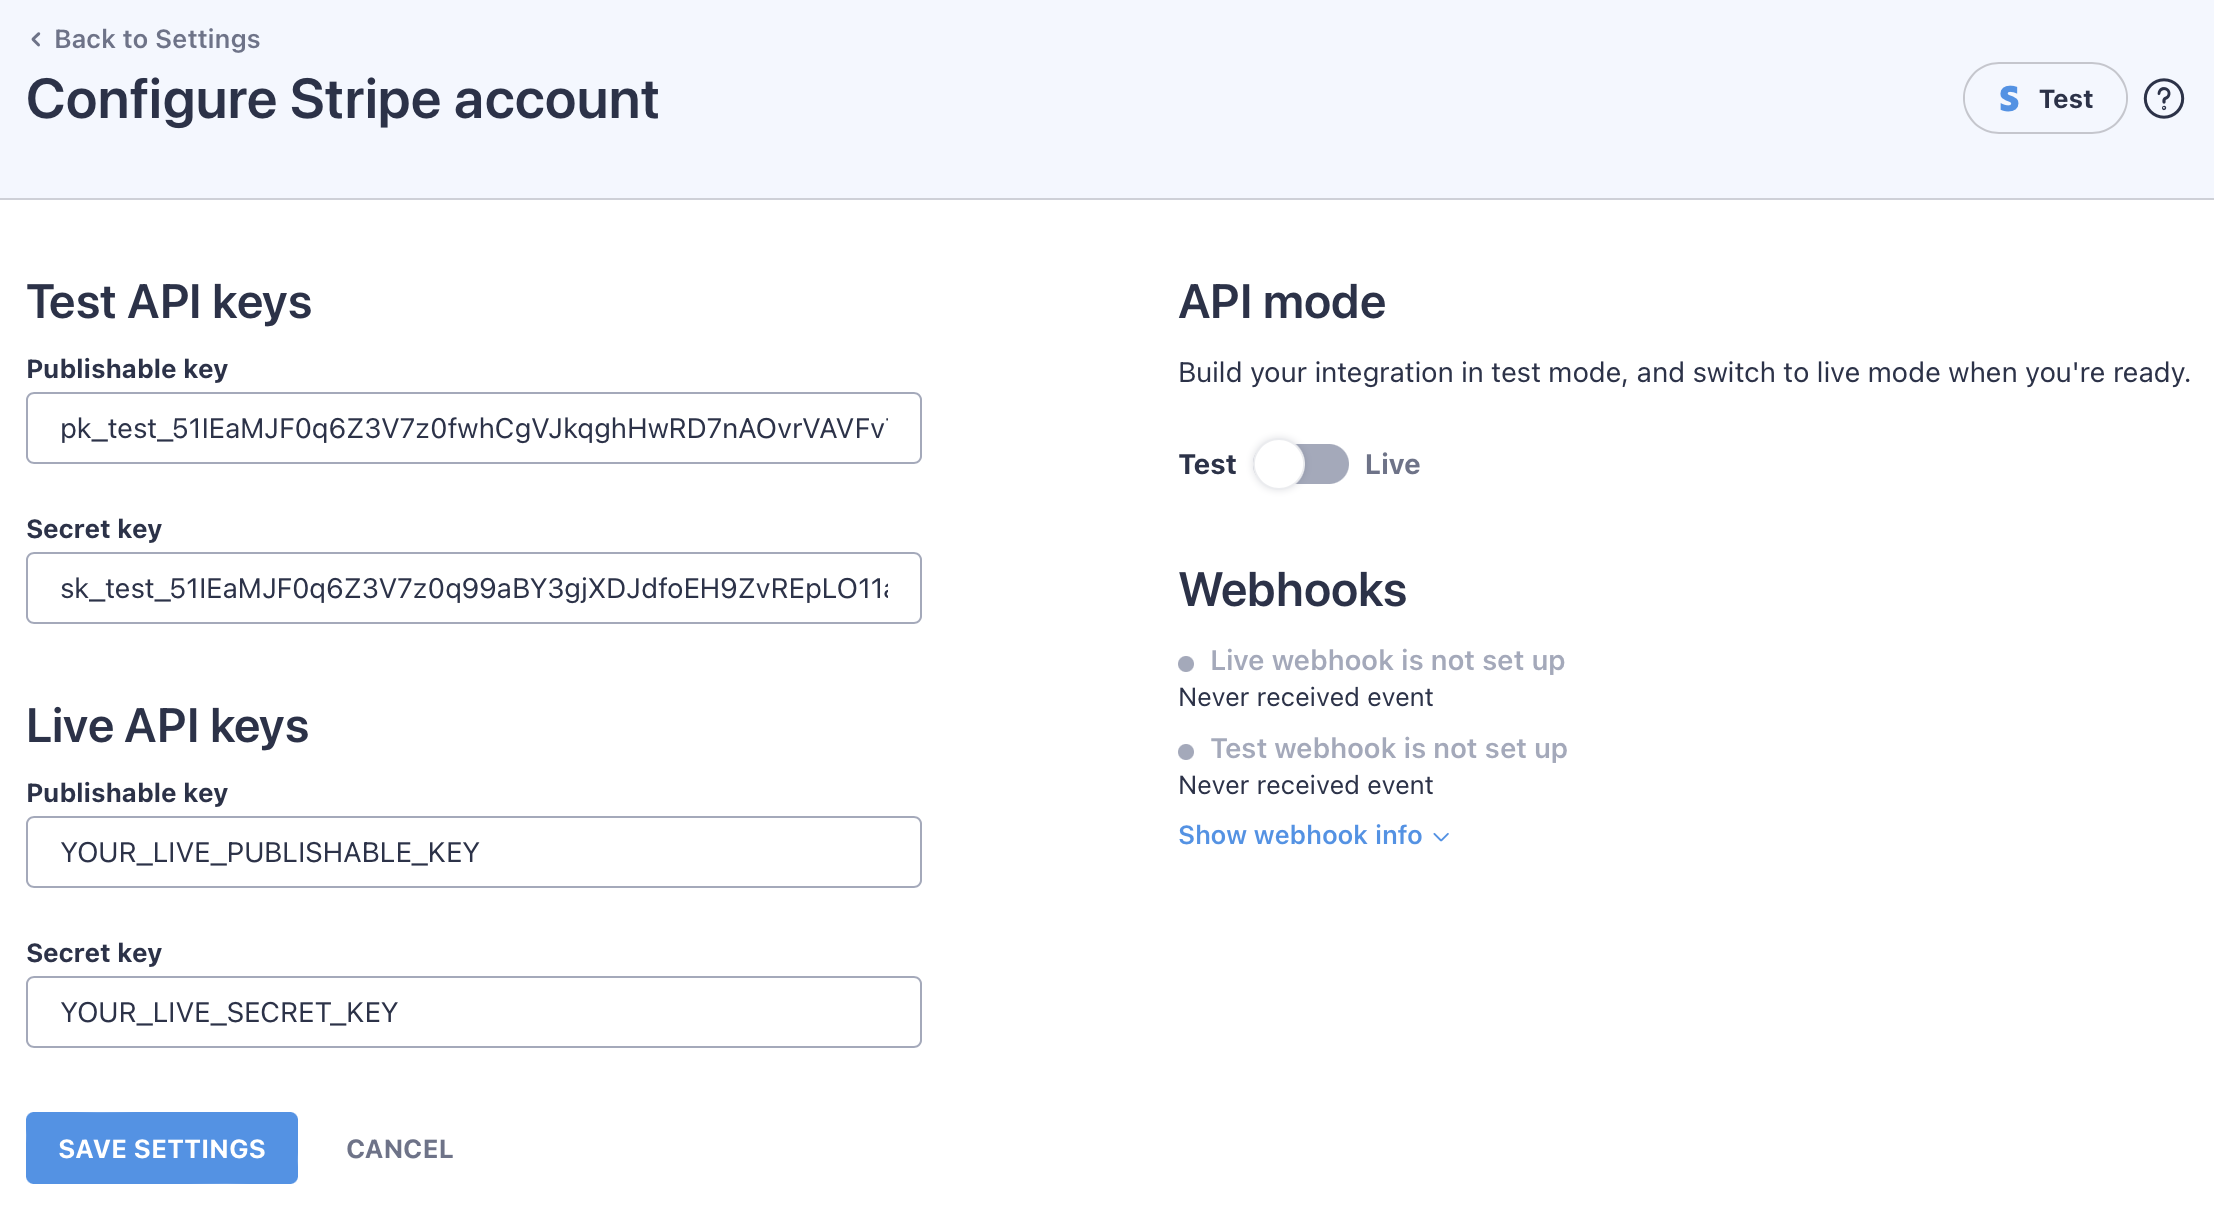 You can configure the WP Full Pay publishable and secret Stripe API keys on the “Configure Stripe account” page.